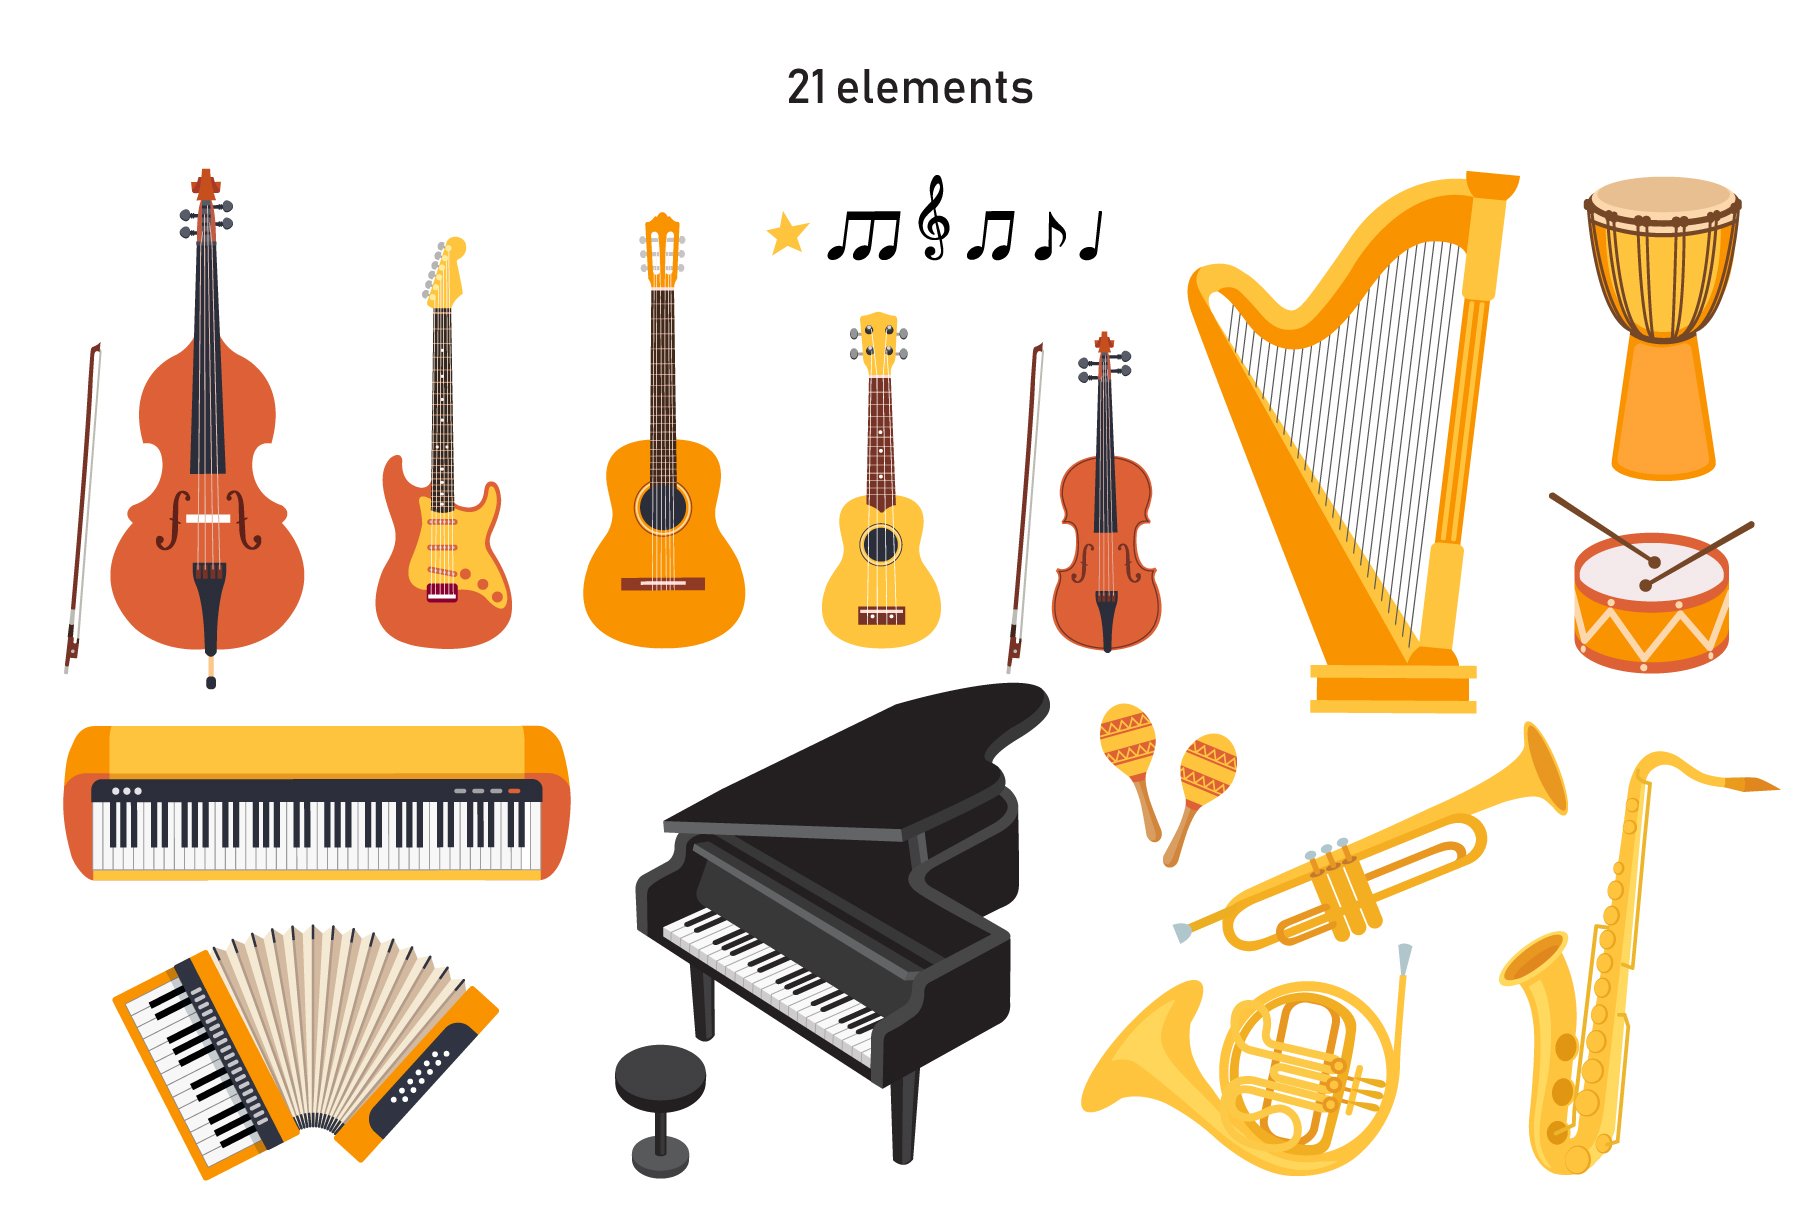 Diverse of musical instruments for the different styles.